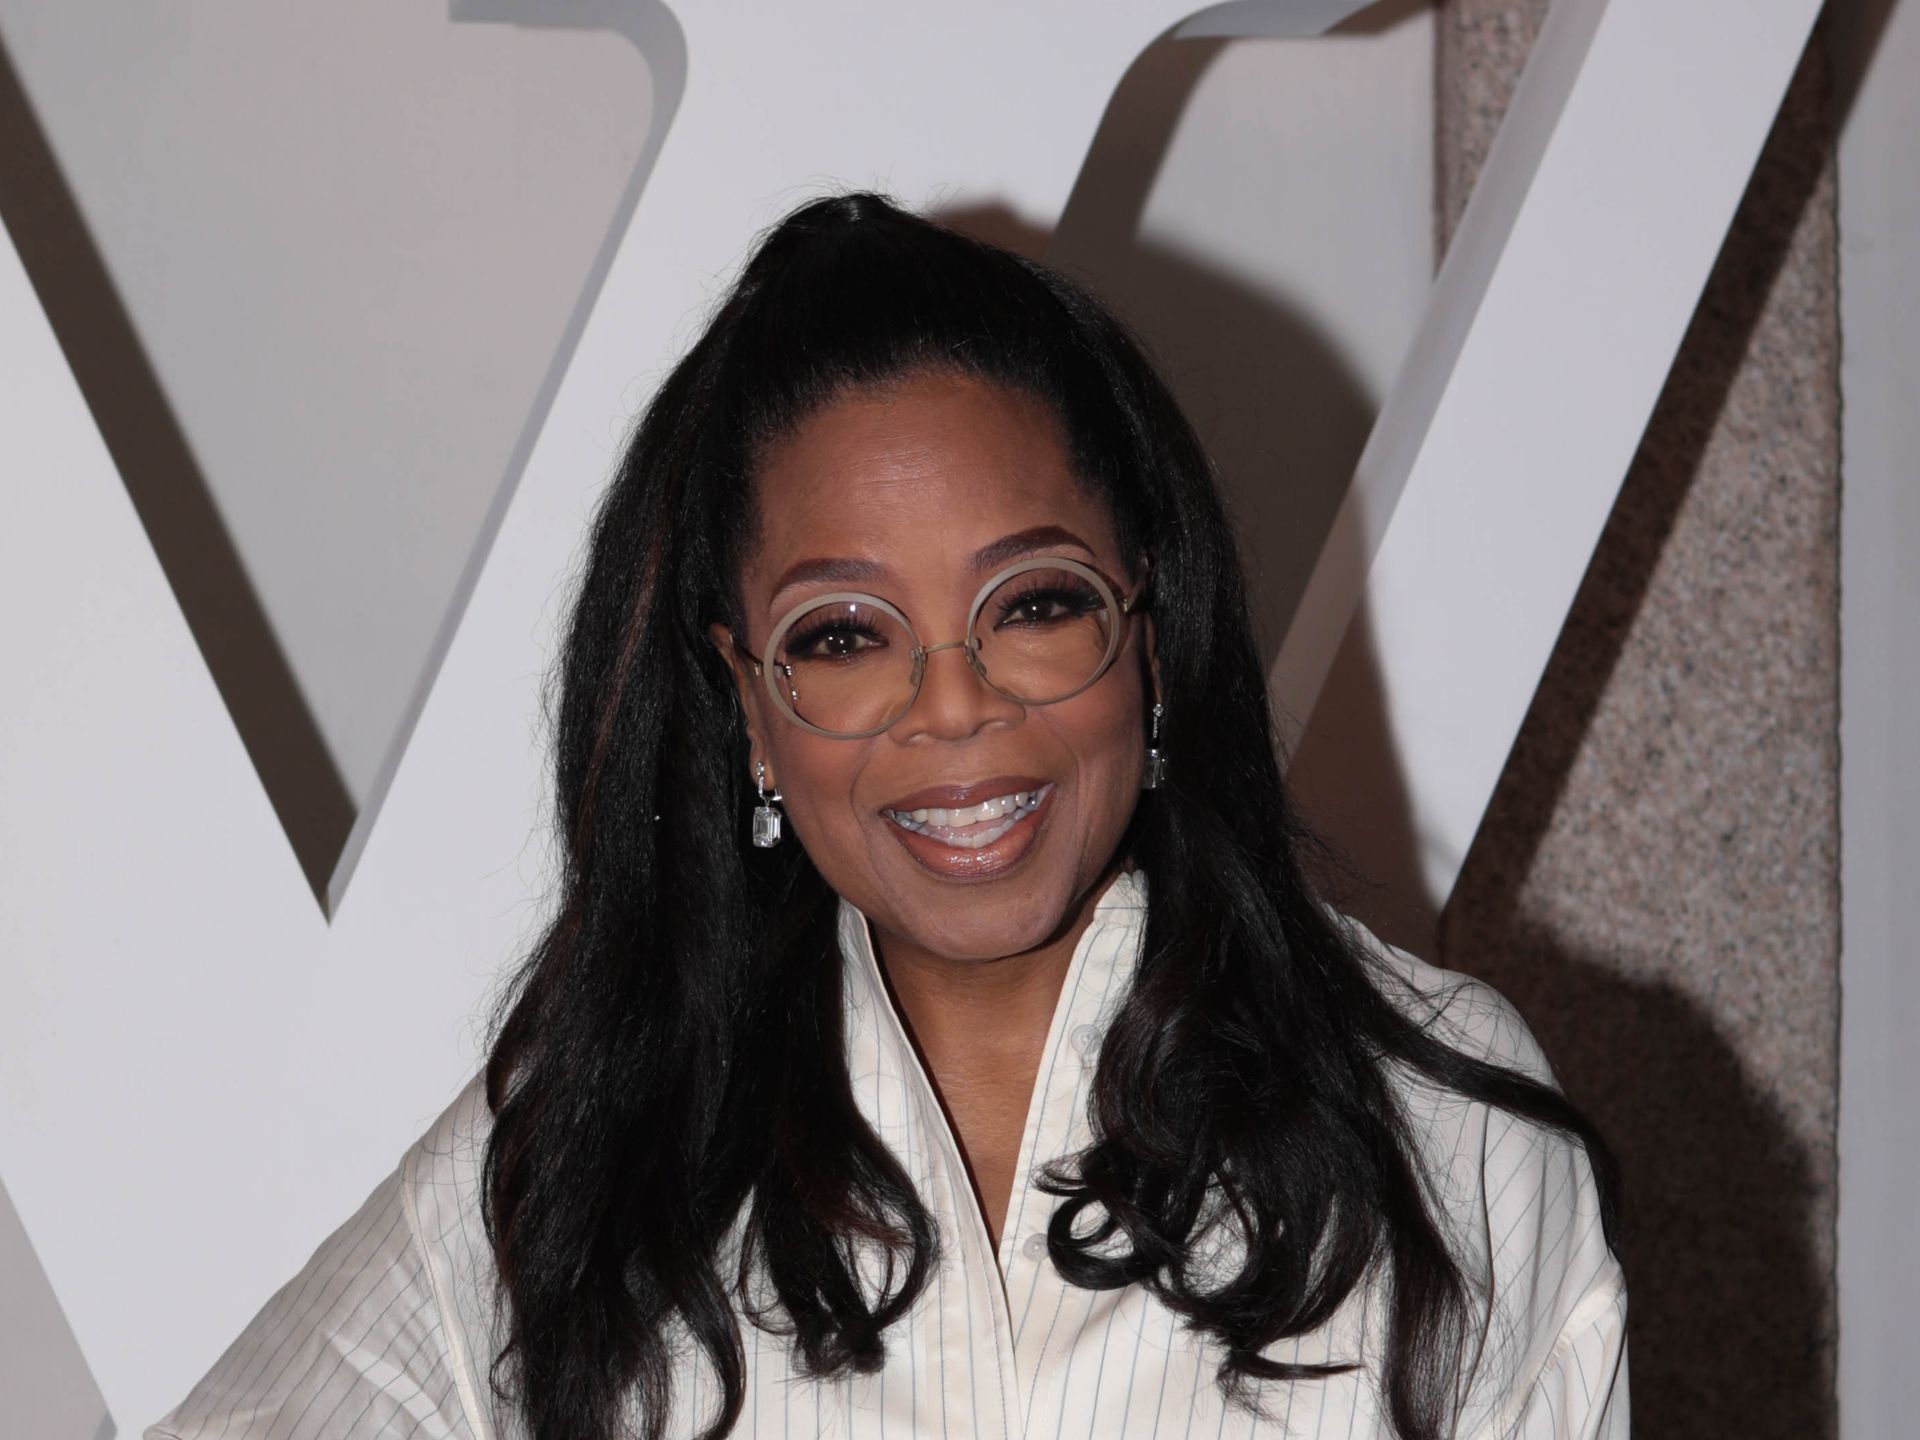 Oprah Winfrey, 69, looks unrecognizable after weight loss